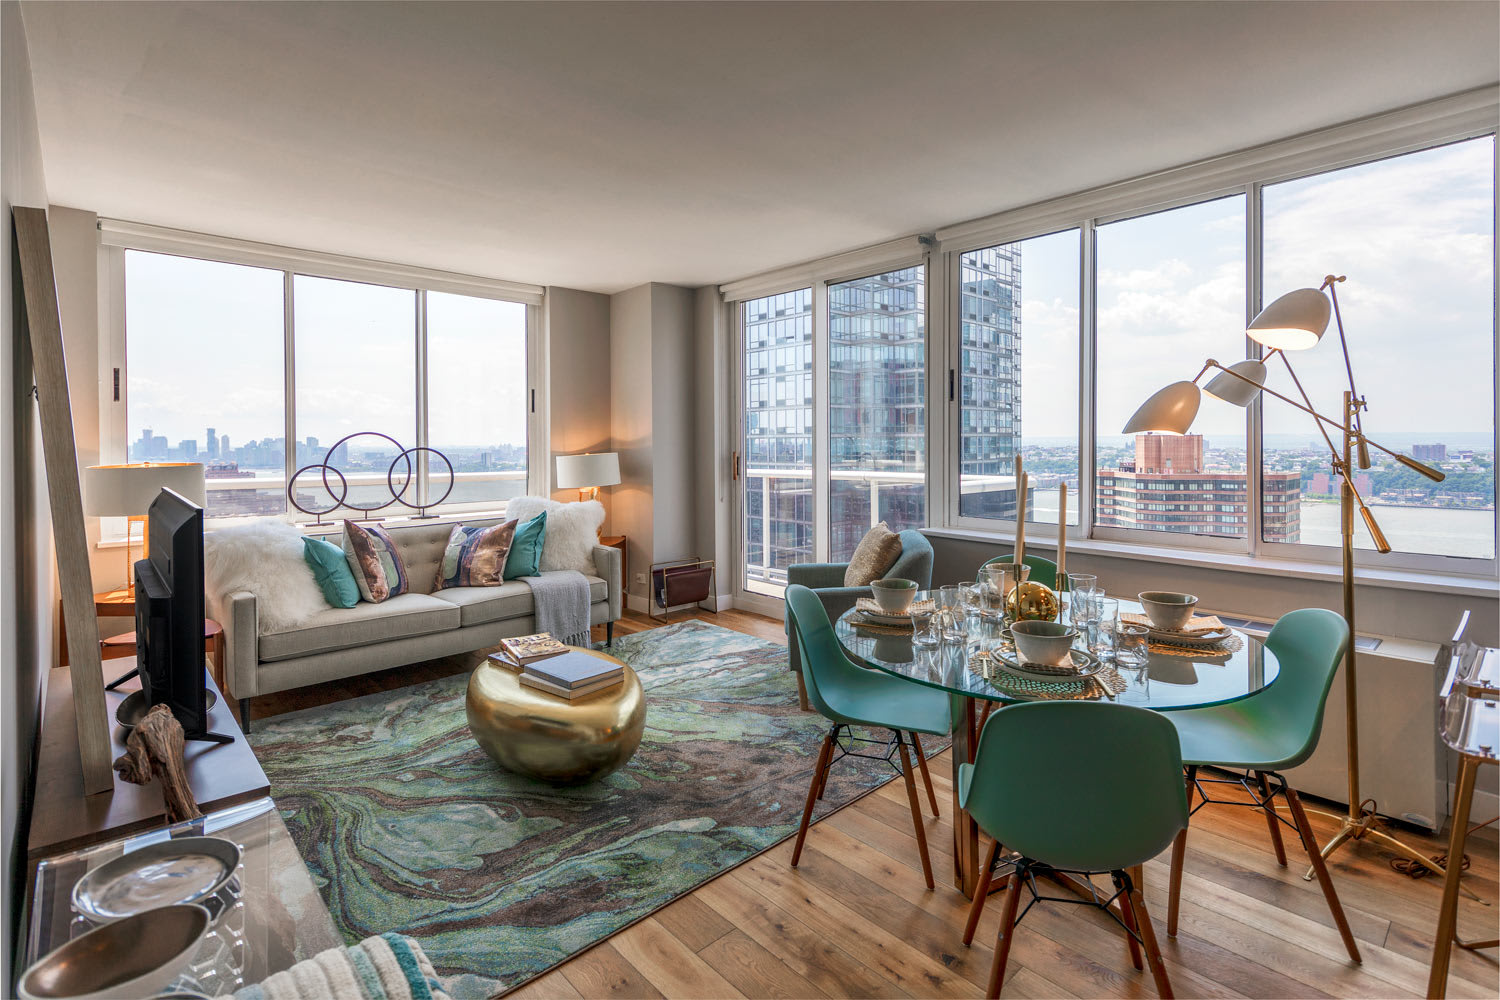 100 Best Apartments In New York City, NY (with pictures)!